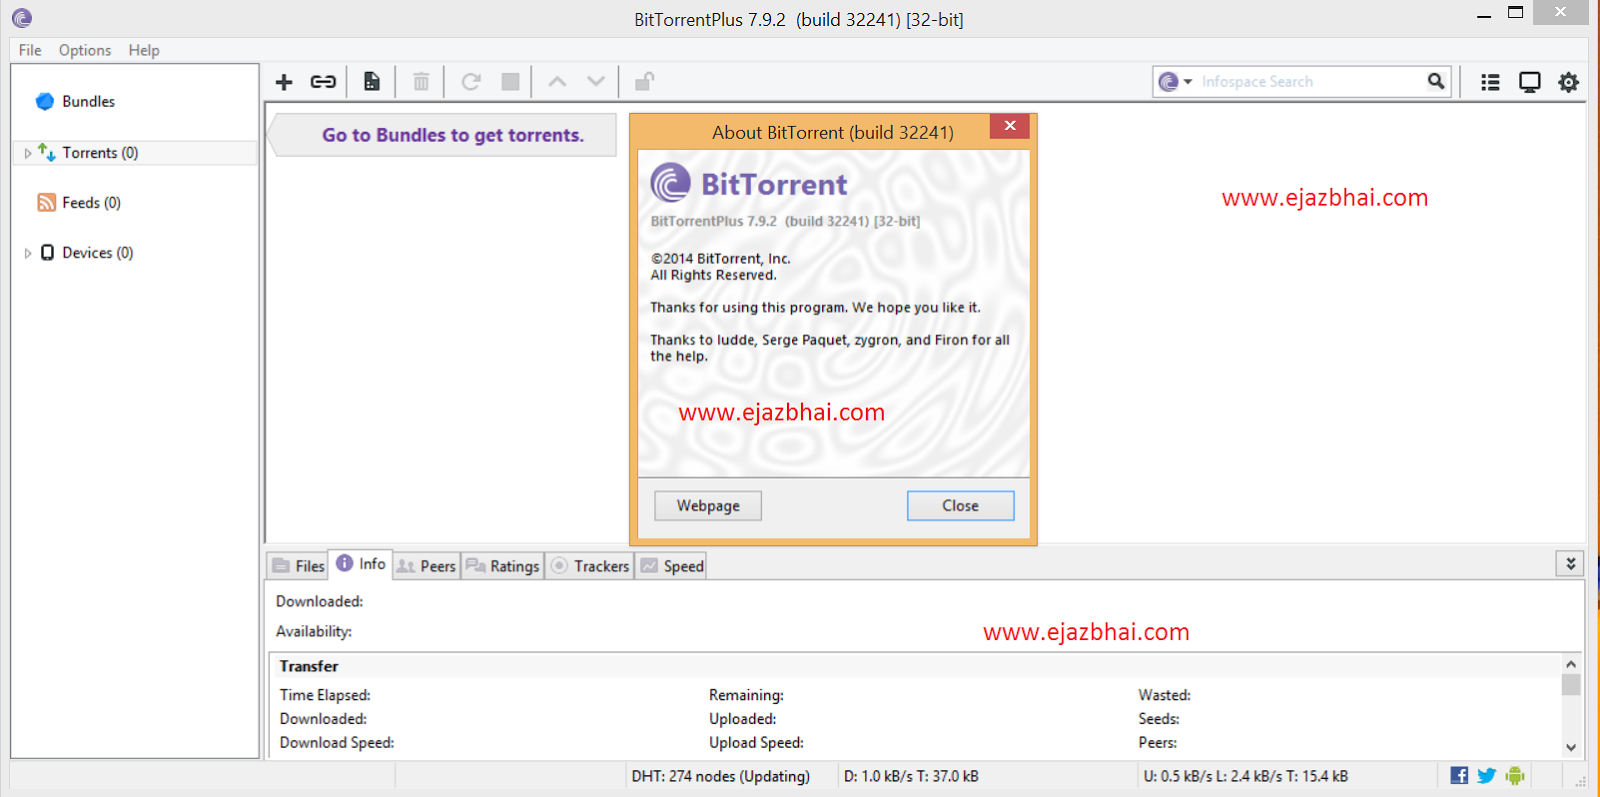 Download Torrent And Send On Mail